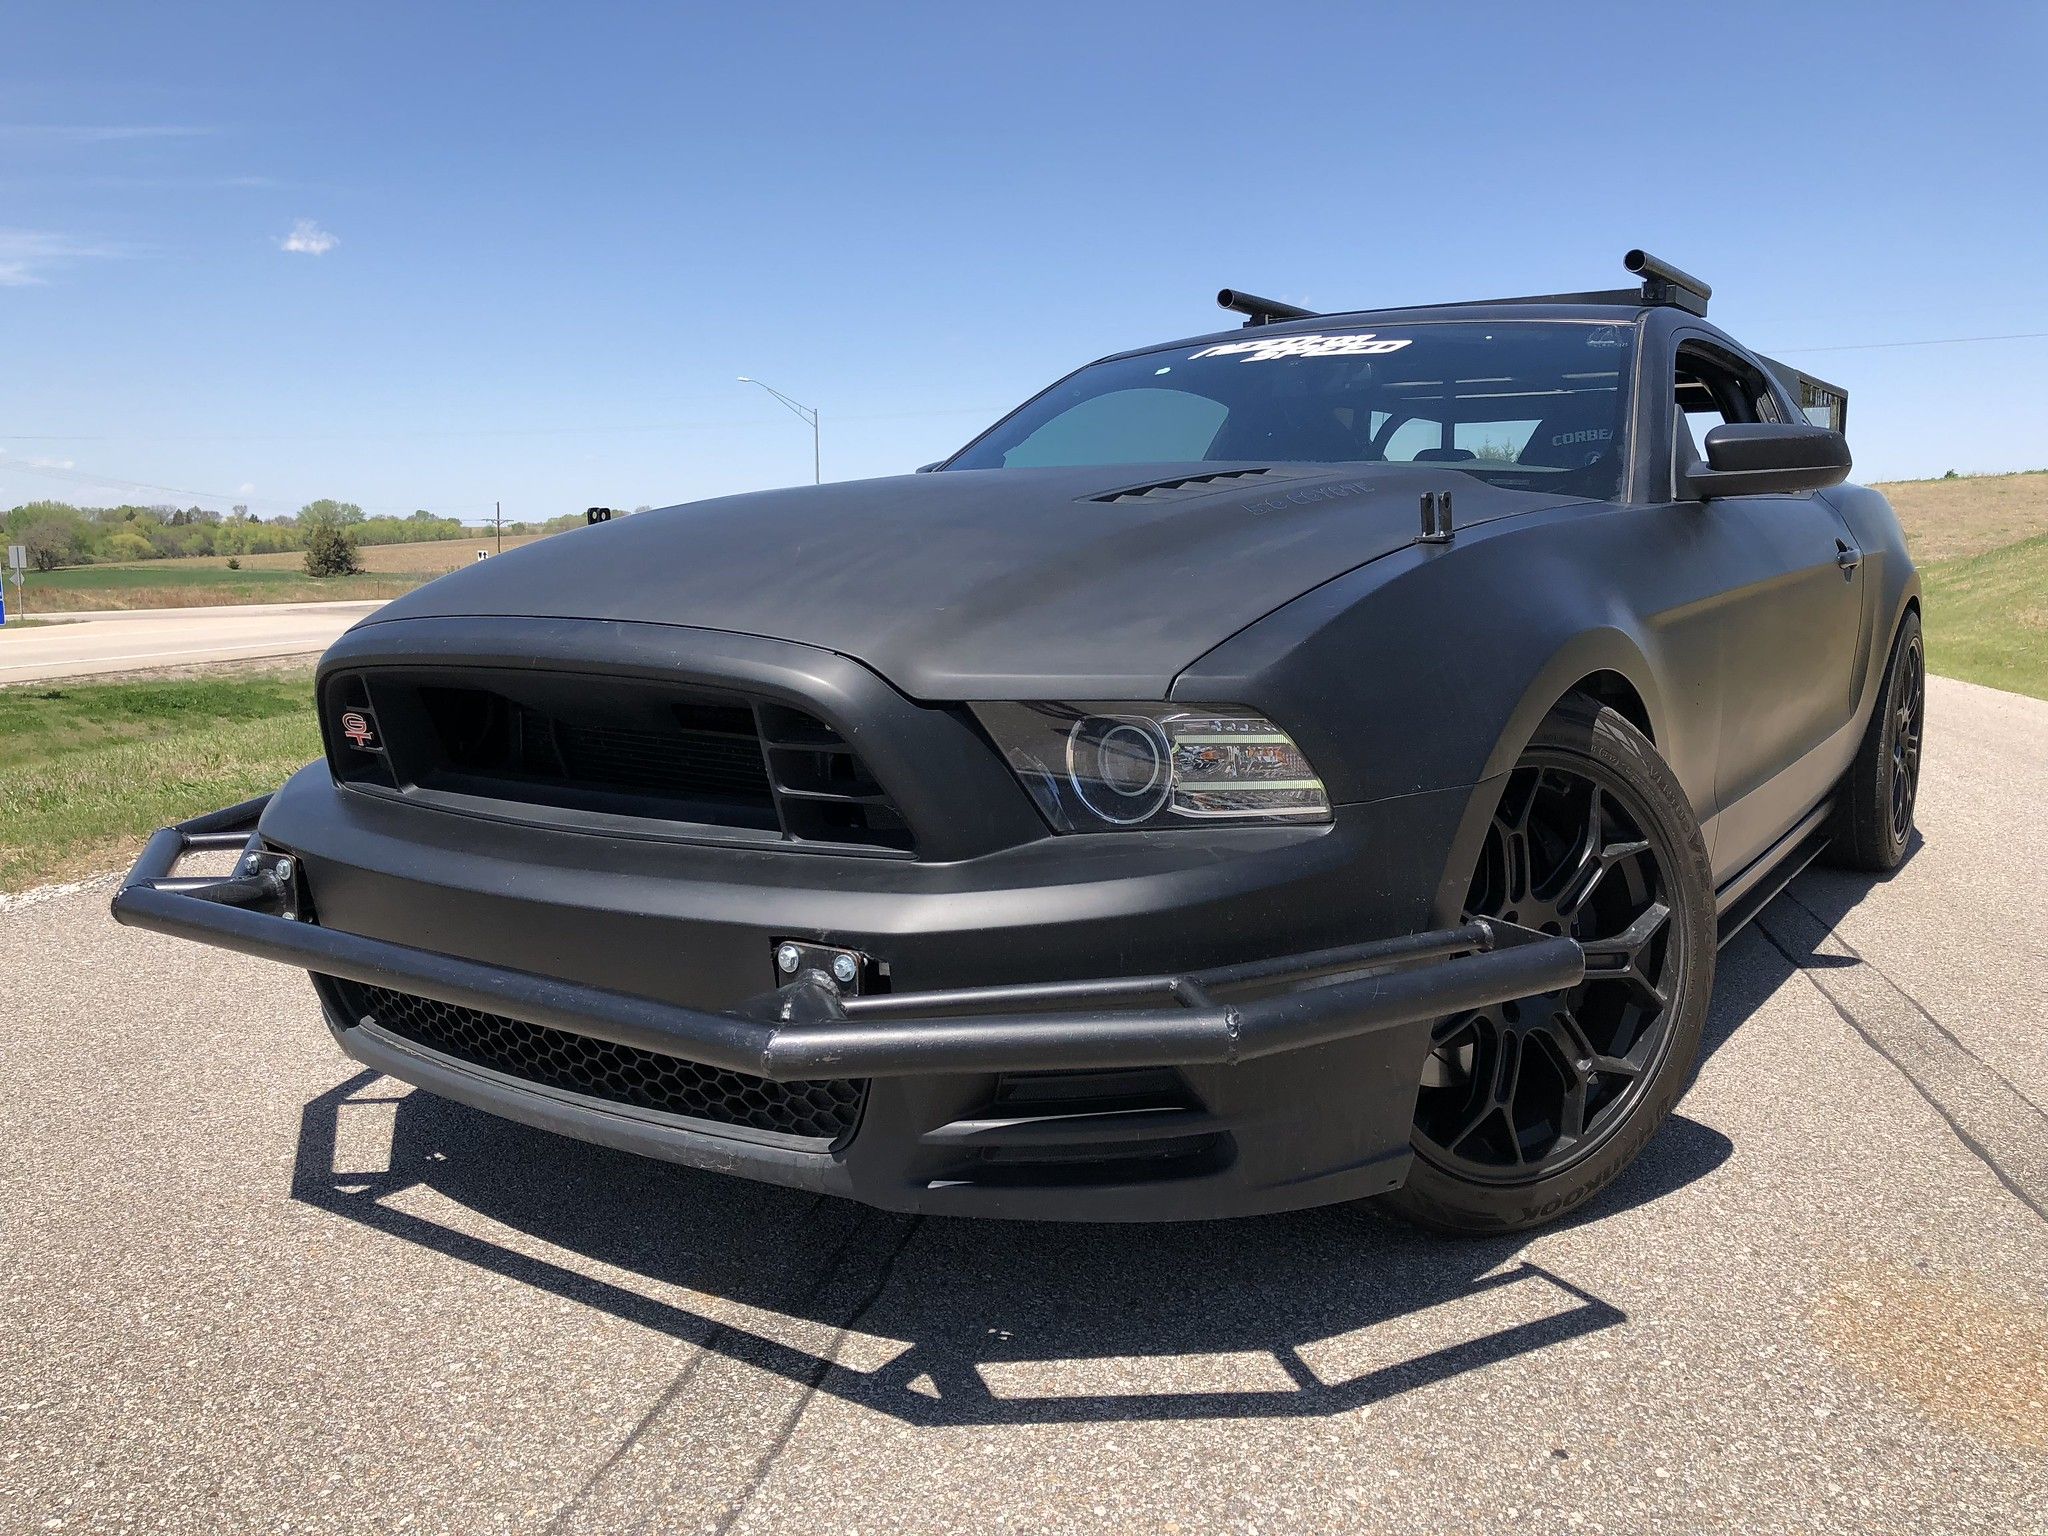 This 625-HP Ford Mustang Is a Camera Car